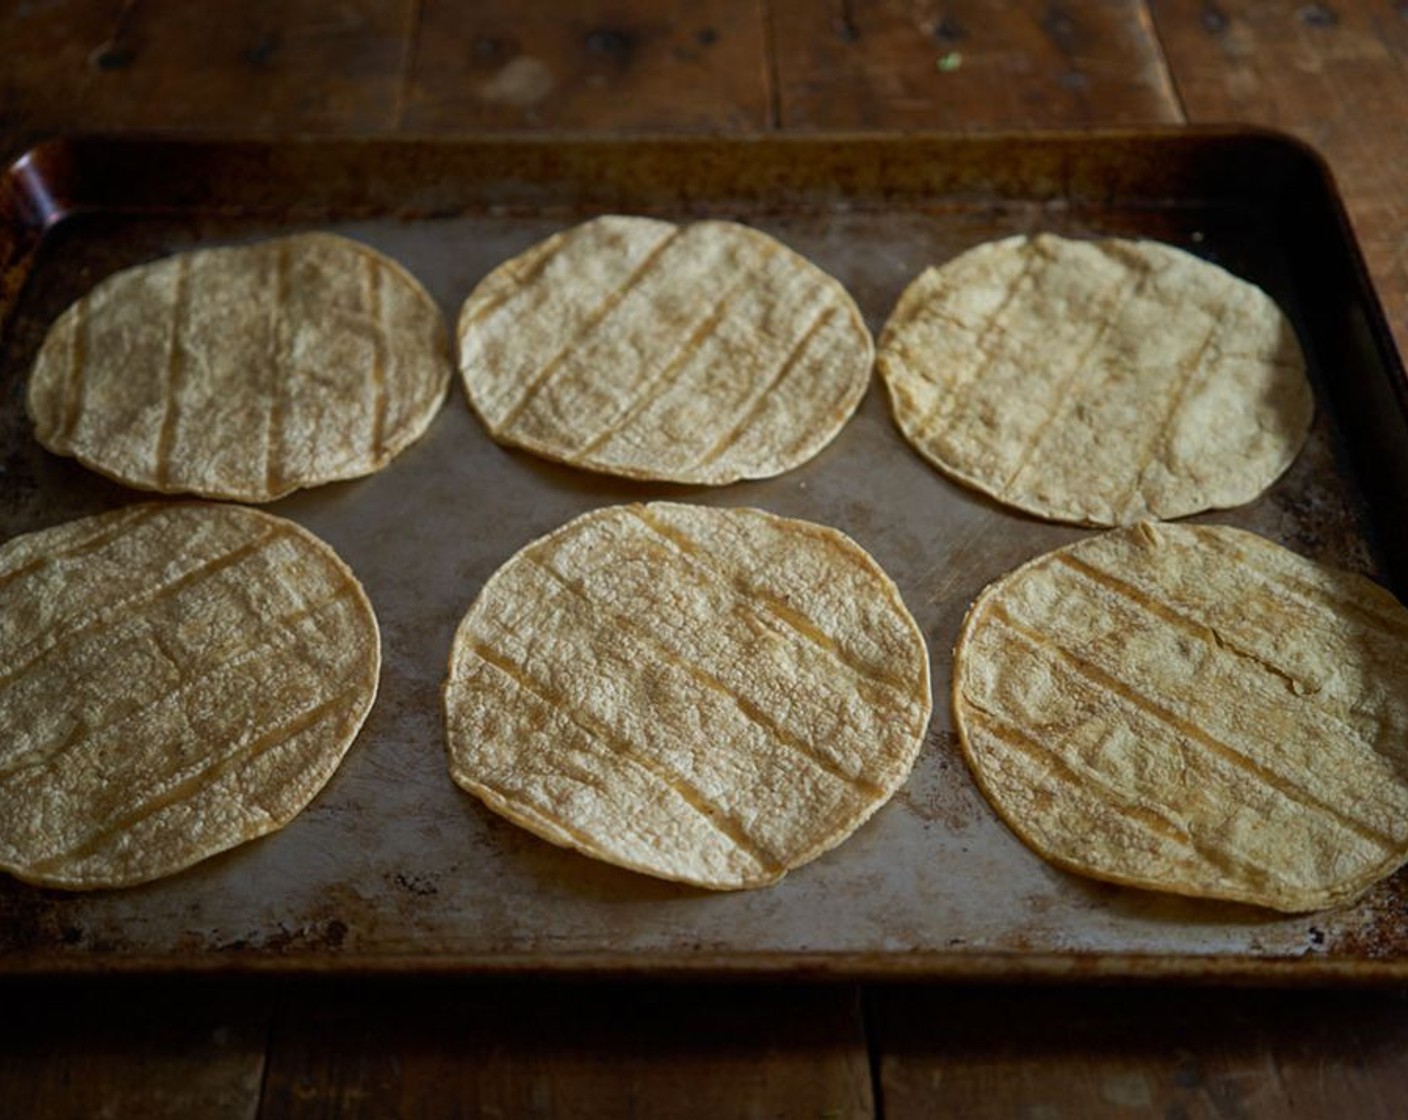 step 2 Lay Tortillas (12) flat on a baking sheet and put them in the oven for a few minutes, turning once, until they seem "stale" and a bit leathery.